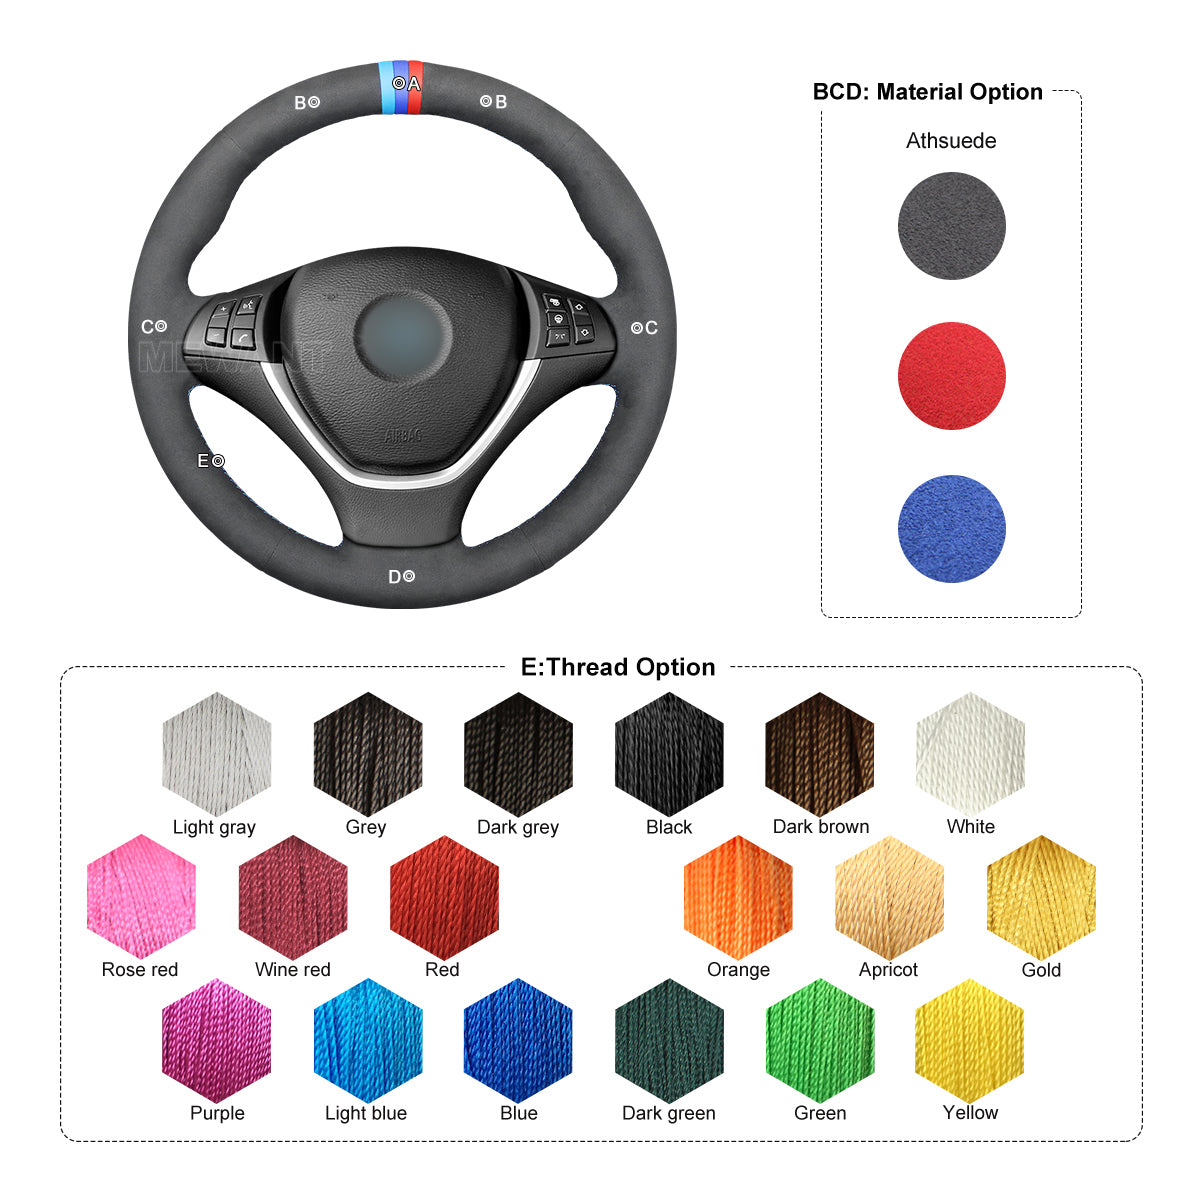 MEWANT Suede Athsuede Car Steering Wheel Cover for BMW X5 E70 2006-2013 X6 E71 2008-2014 / E72 (ActiveHybrid X6) 2009-2010